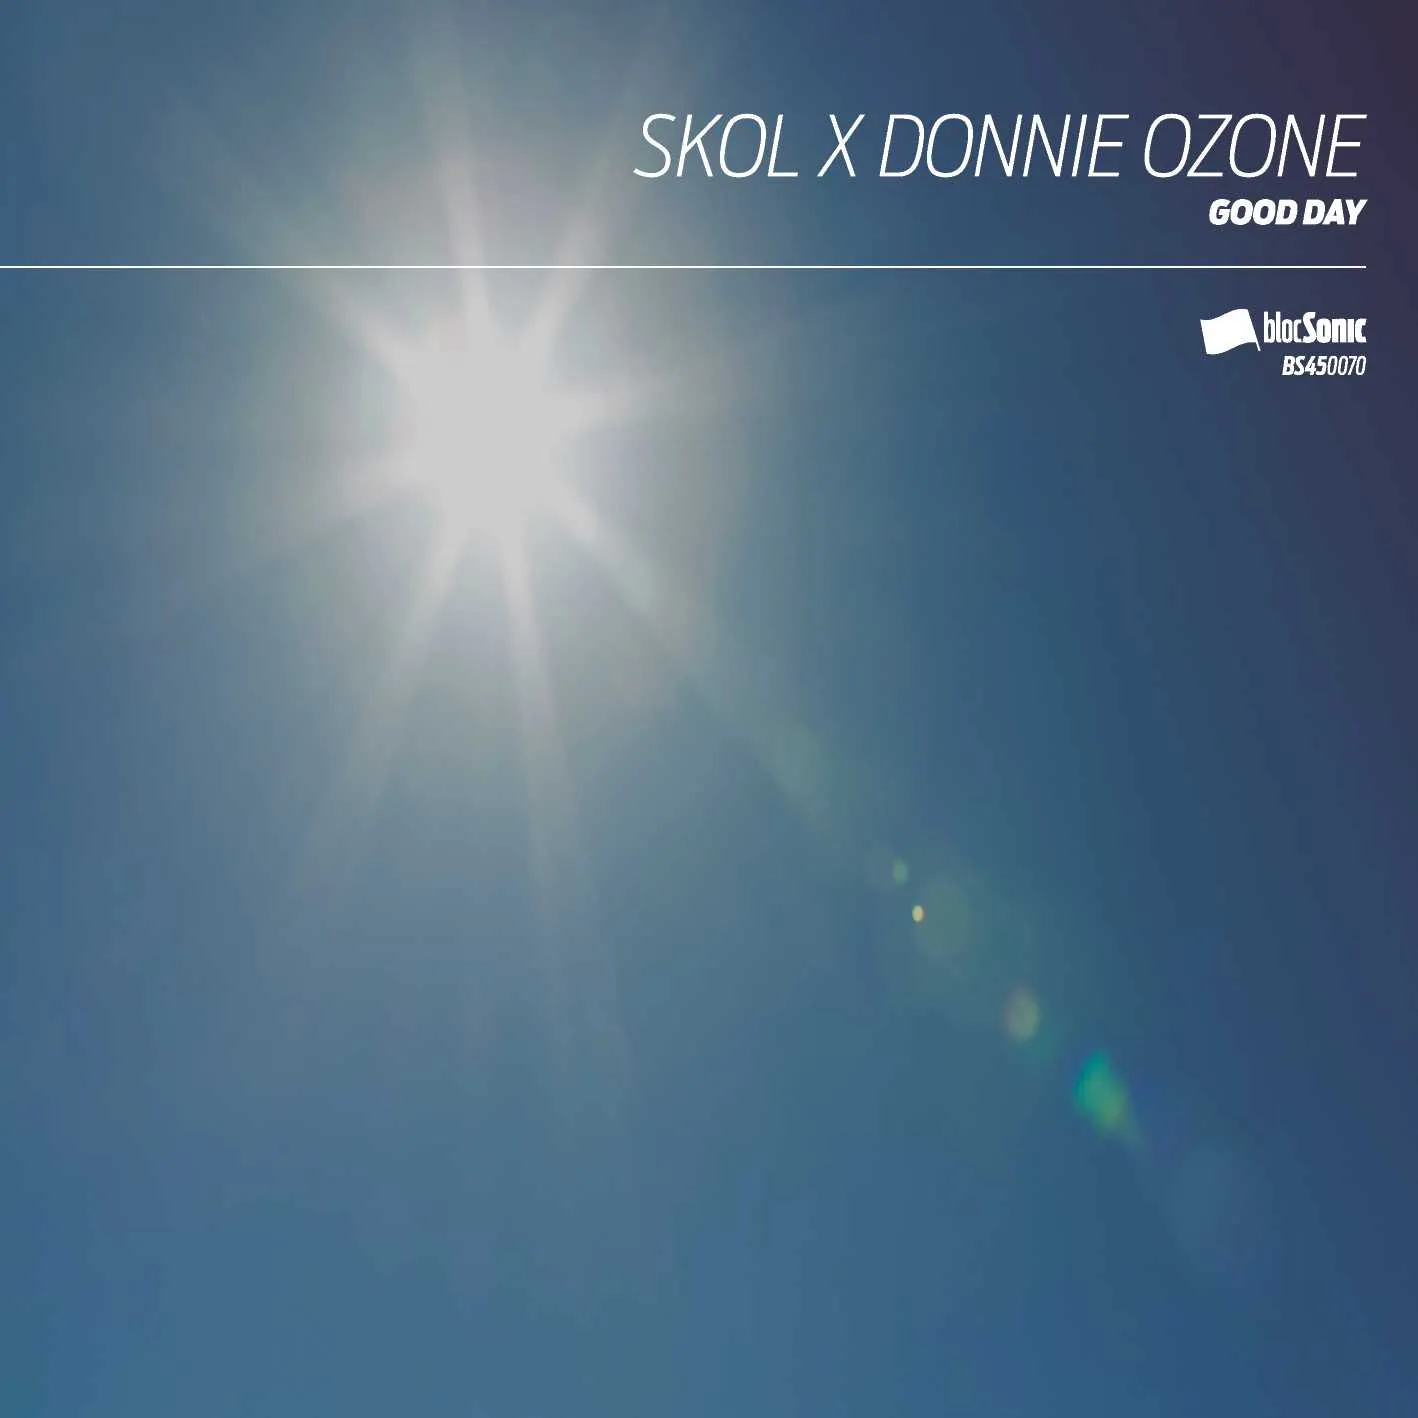 Cover of “Good Day” by SKOL x Donnie Ozone